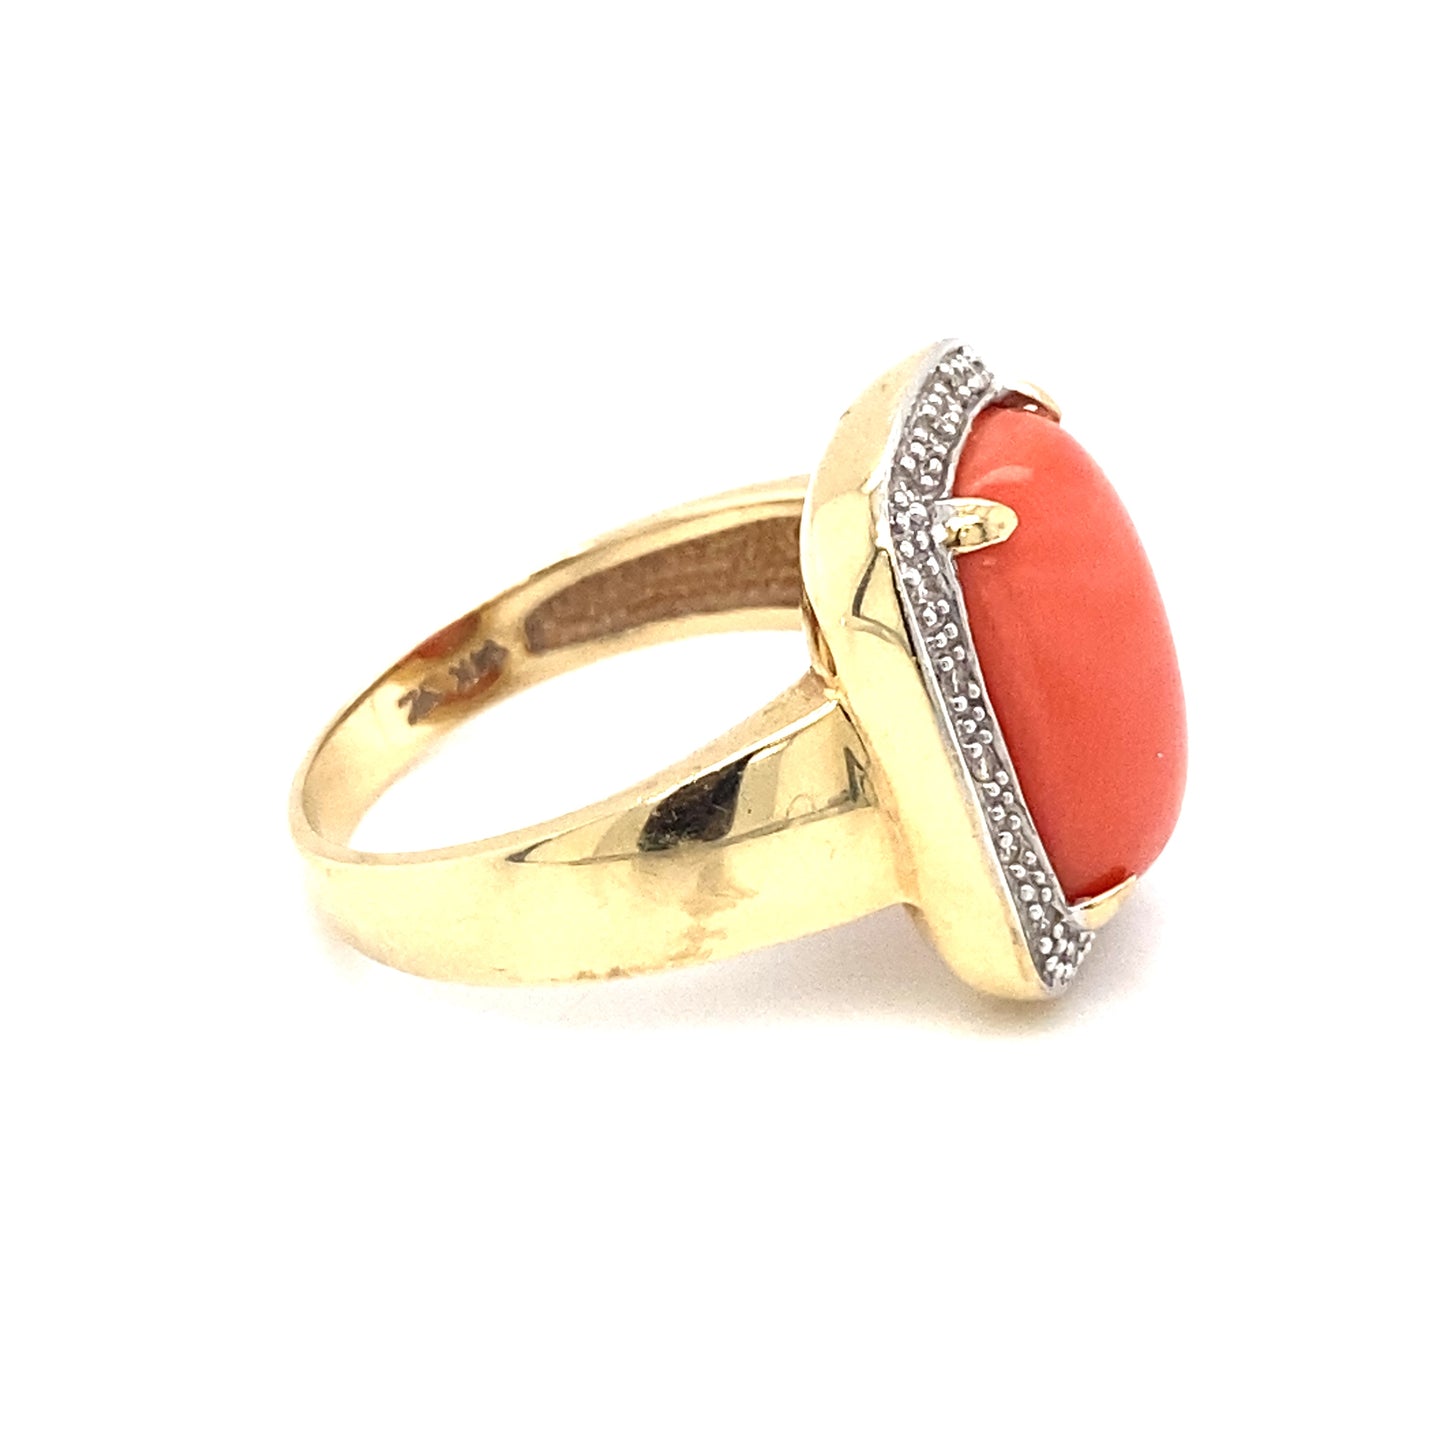 Circa 2000s Le Vian Coral and Diamond Ring in 14K Gold